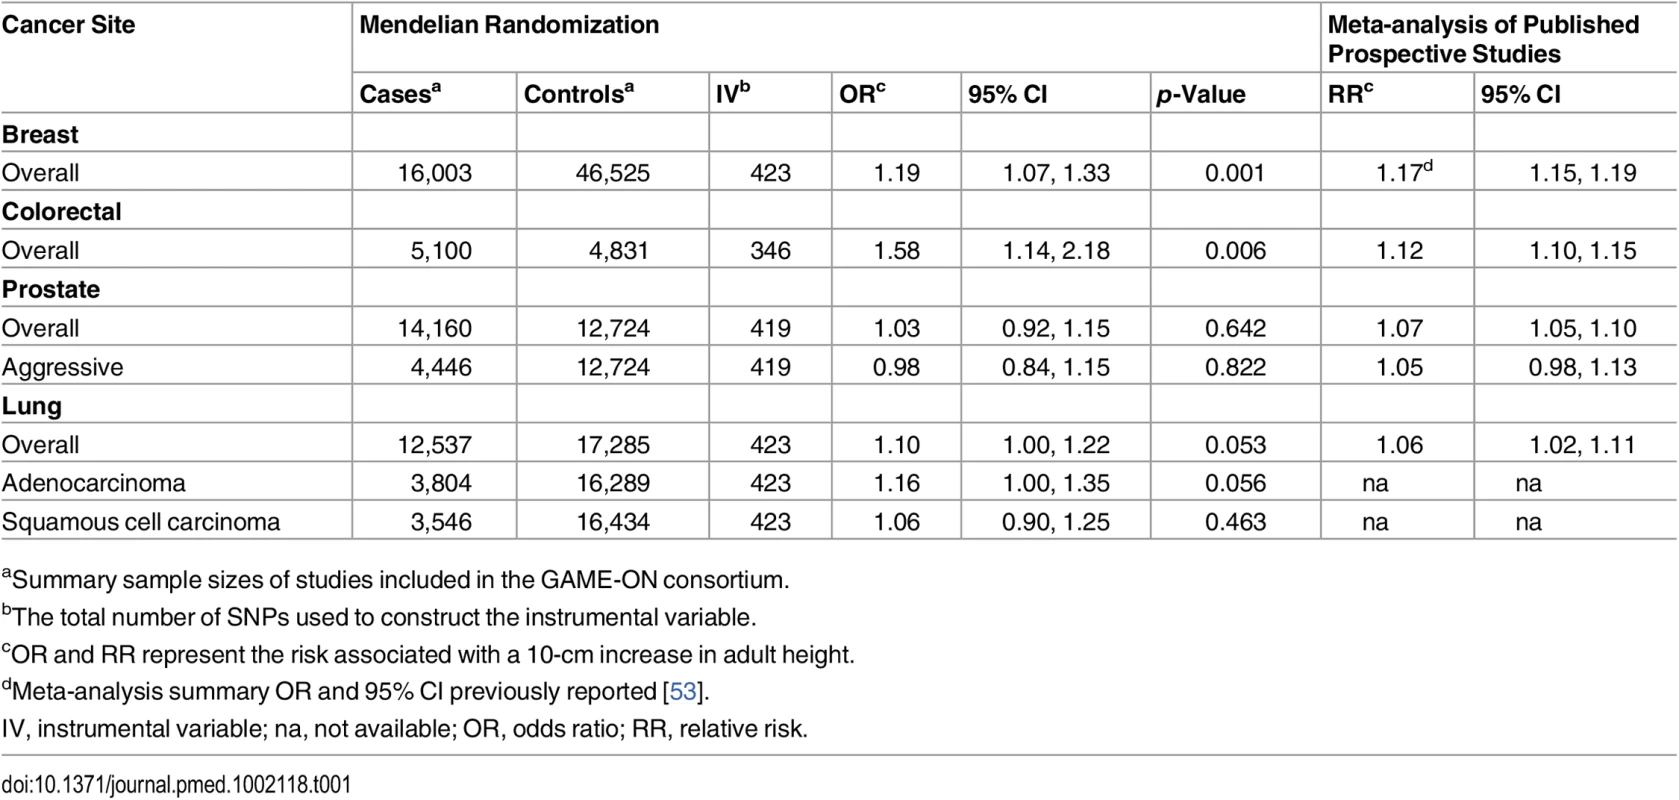 Odds ratios and 95% confidence intervals estimated from Mendelian randomization analyses compared to the summary estimates (Figs <em class=&quot;ref&quot;>2</em>–<em class=&quot;ref&quot;>4</em>) from published prospective studies for the association between adult height and cancers of the breast, colorectum, prostate, and lung.